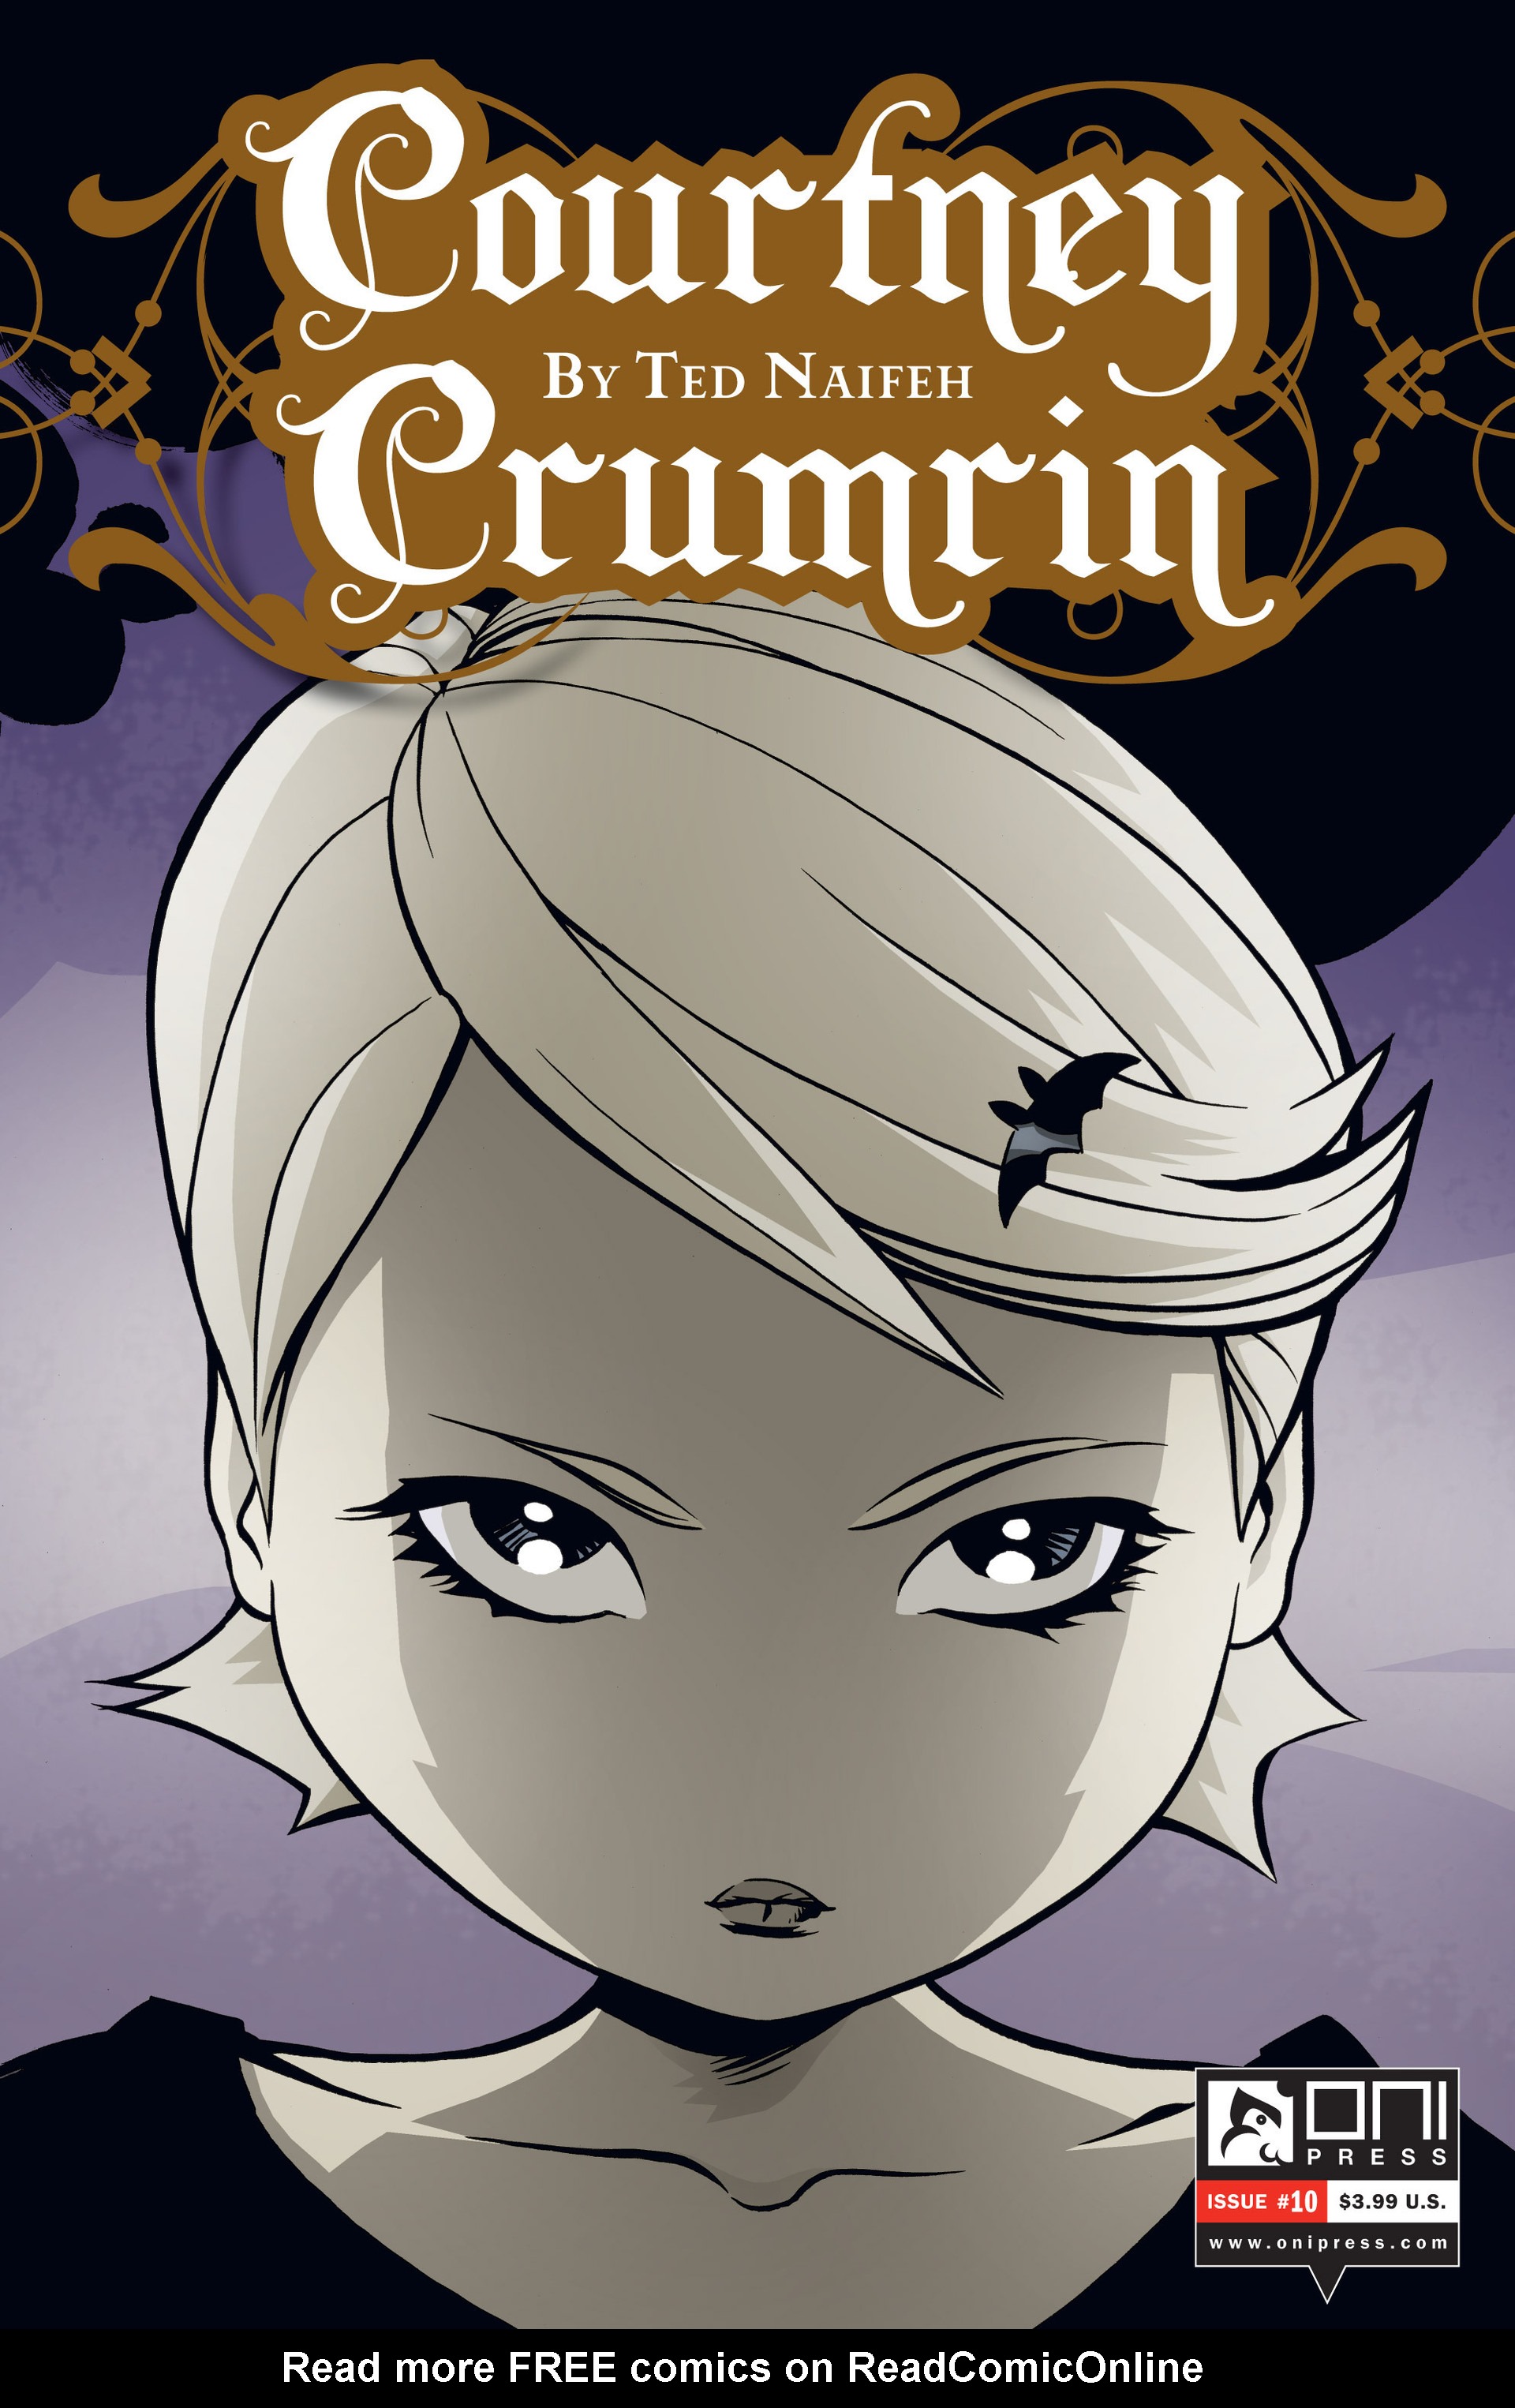 Read online Courtney Crumrin comic -  Issue #10 - 1